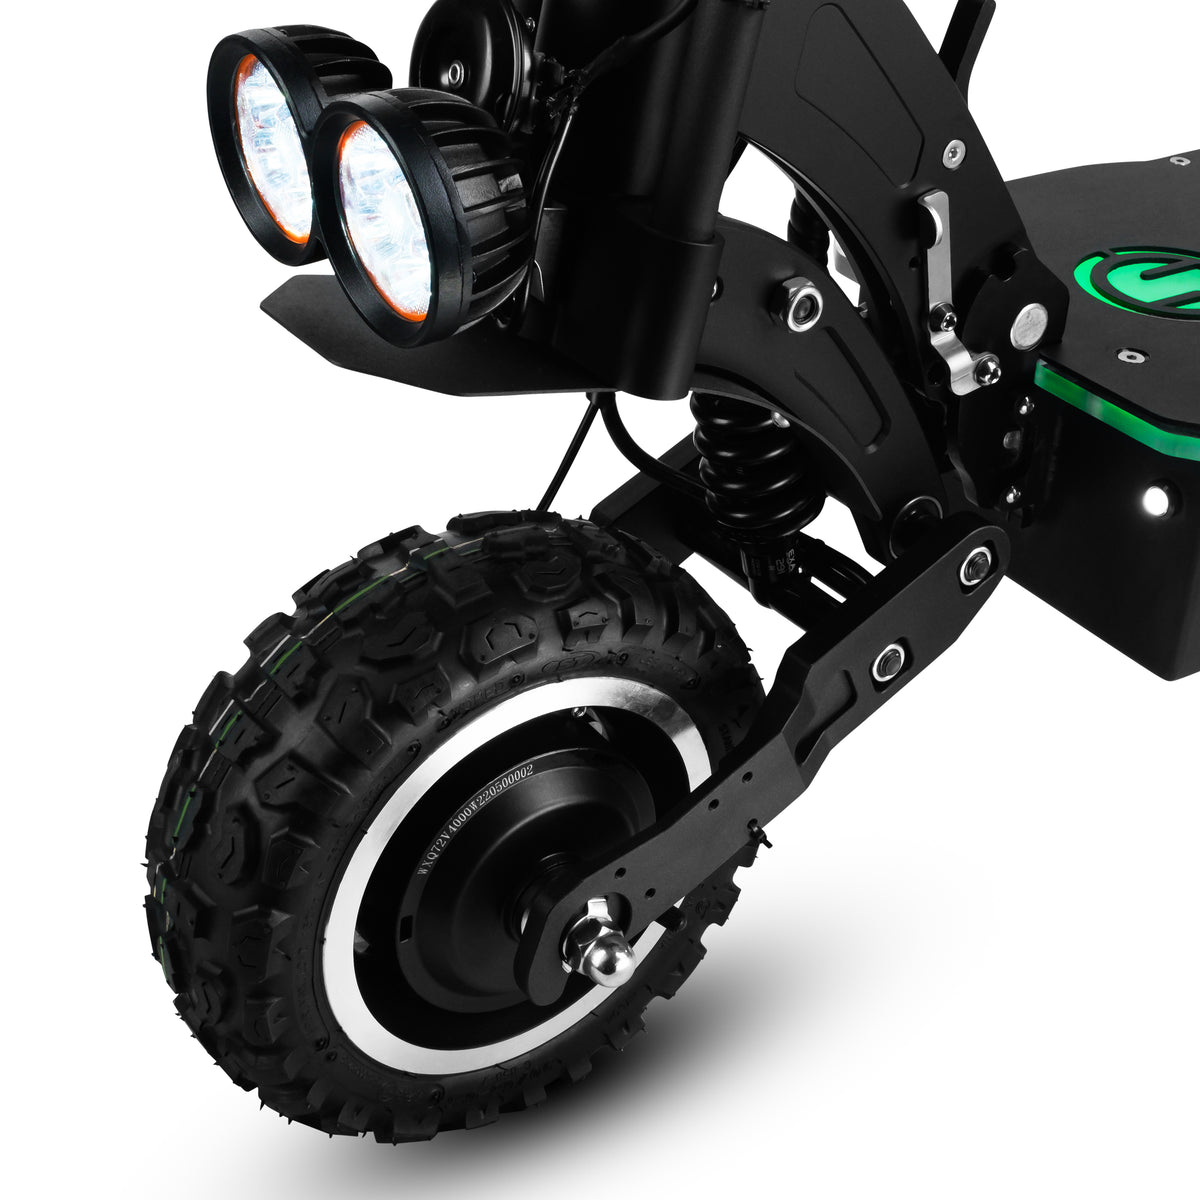 The Beast  Electric Off-road Scooter